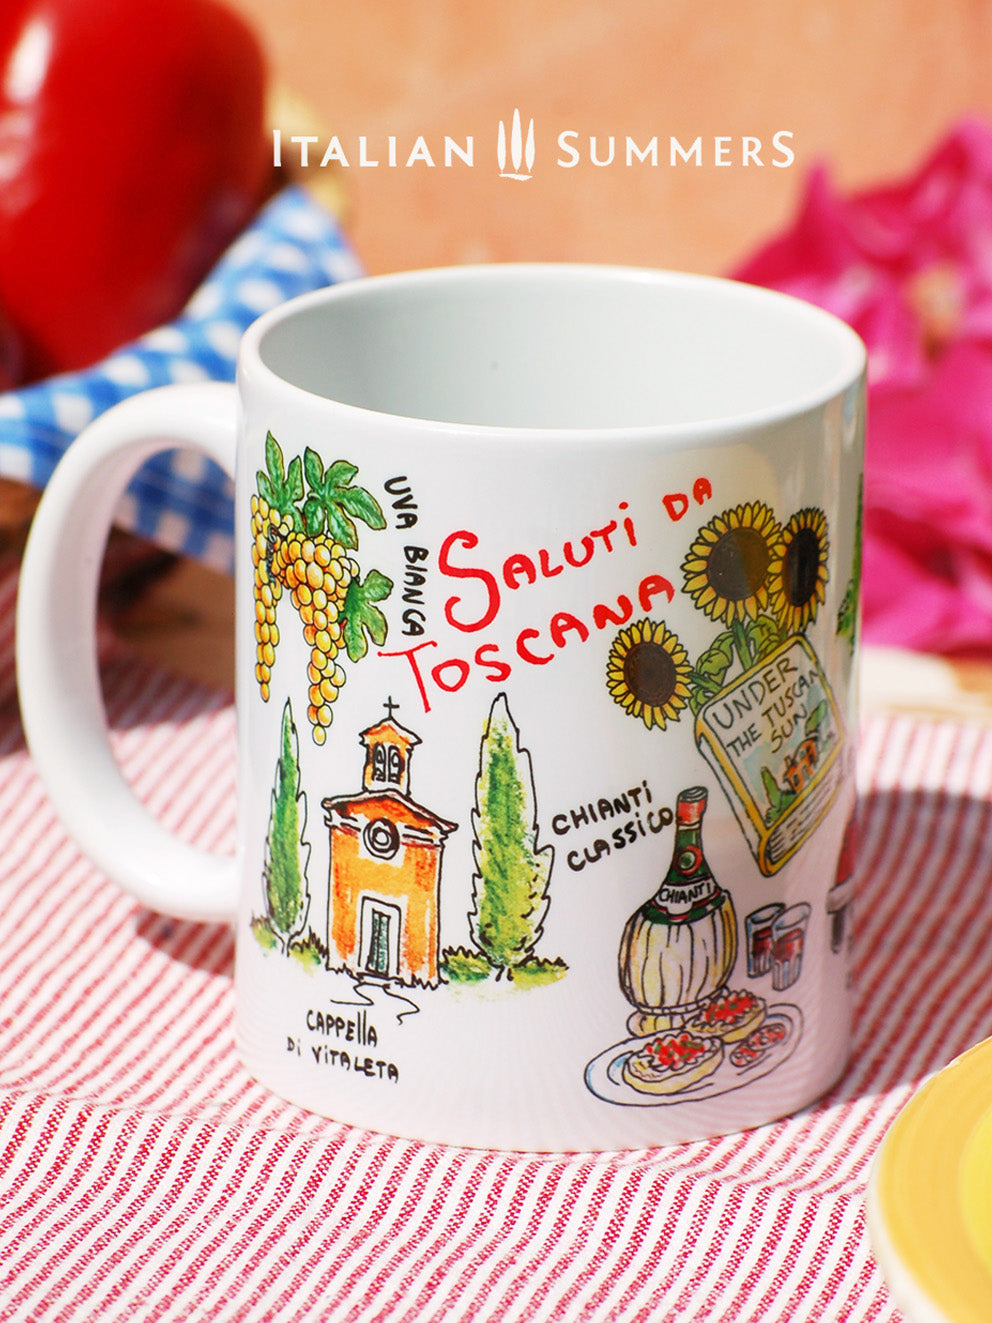 Italy | Tuscany inspired coffee mug with sketches of Tuscany how you would like it to be! A sketch of Villa Belvedere with cipresses, a red vintage Fiat 500 cabrio, hanging grape bunches, a wooden wine barrel, the book Under the Tuscan sun with sunflowers next to it. A big flask of Chianti classico and bruschette and the little chapel Vitaleta. By the way, of course on the wine barel there is a cat sleeping!